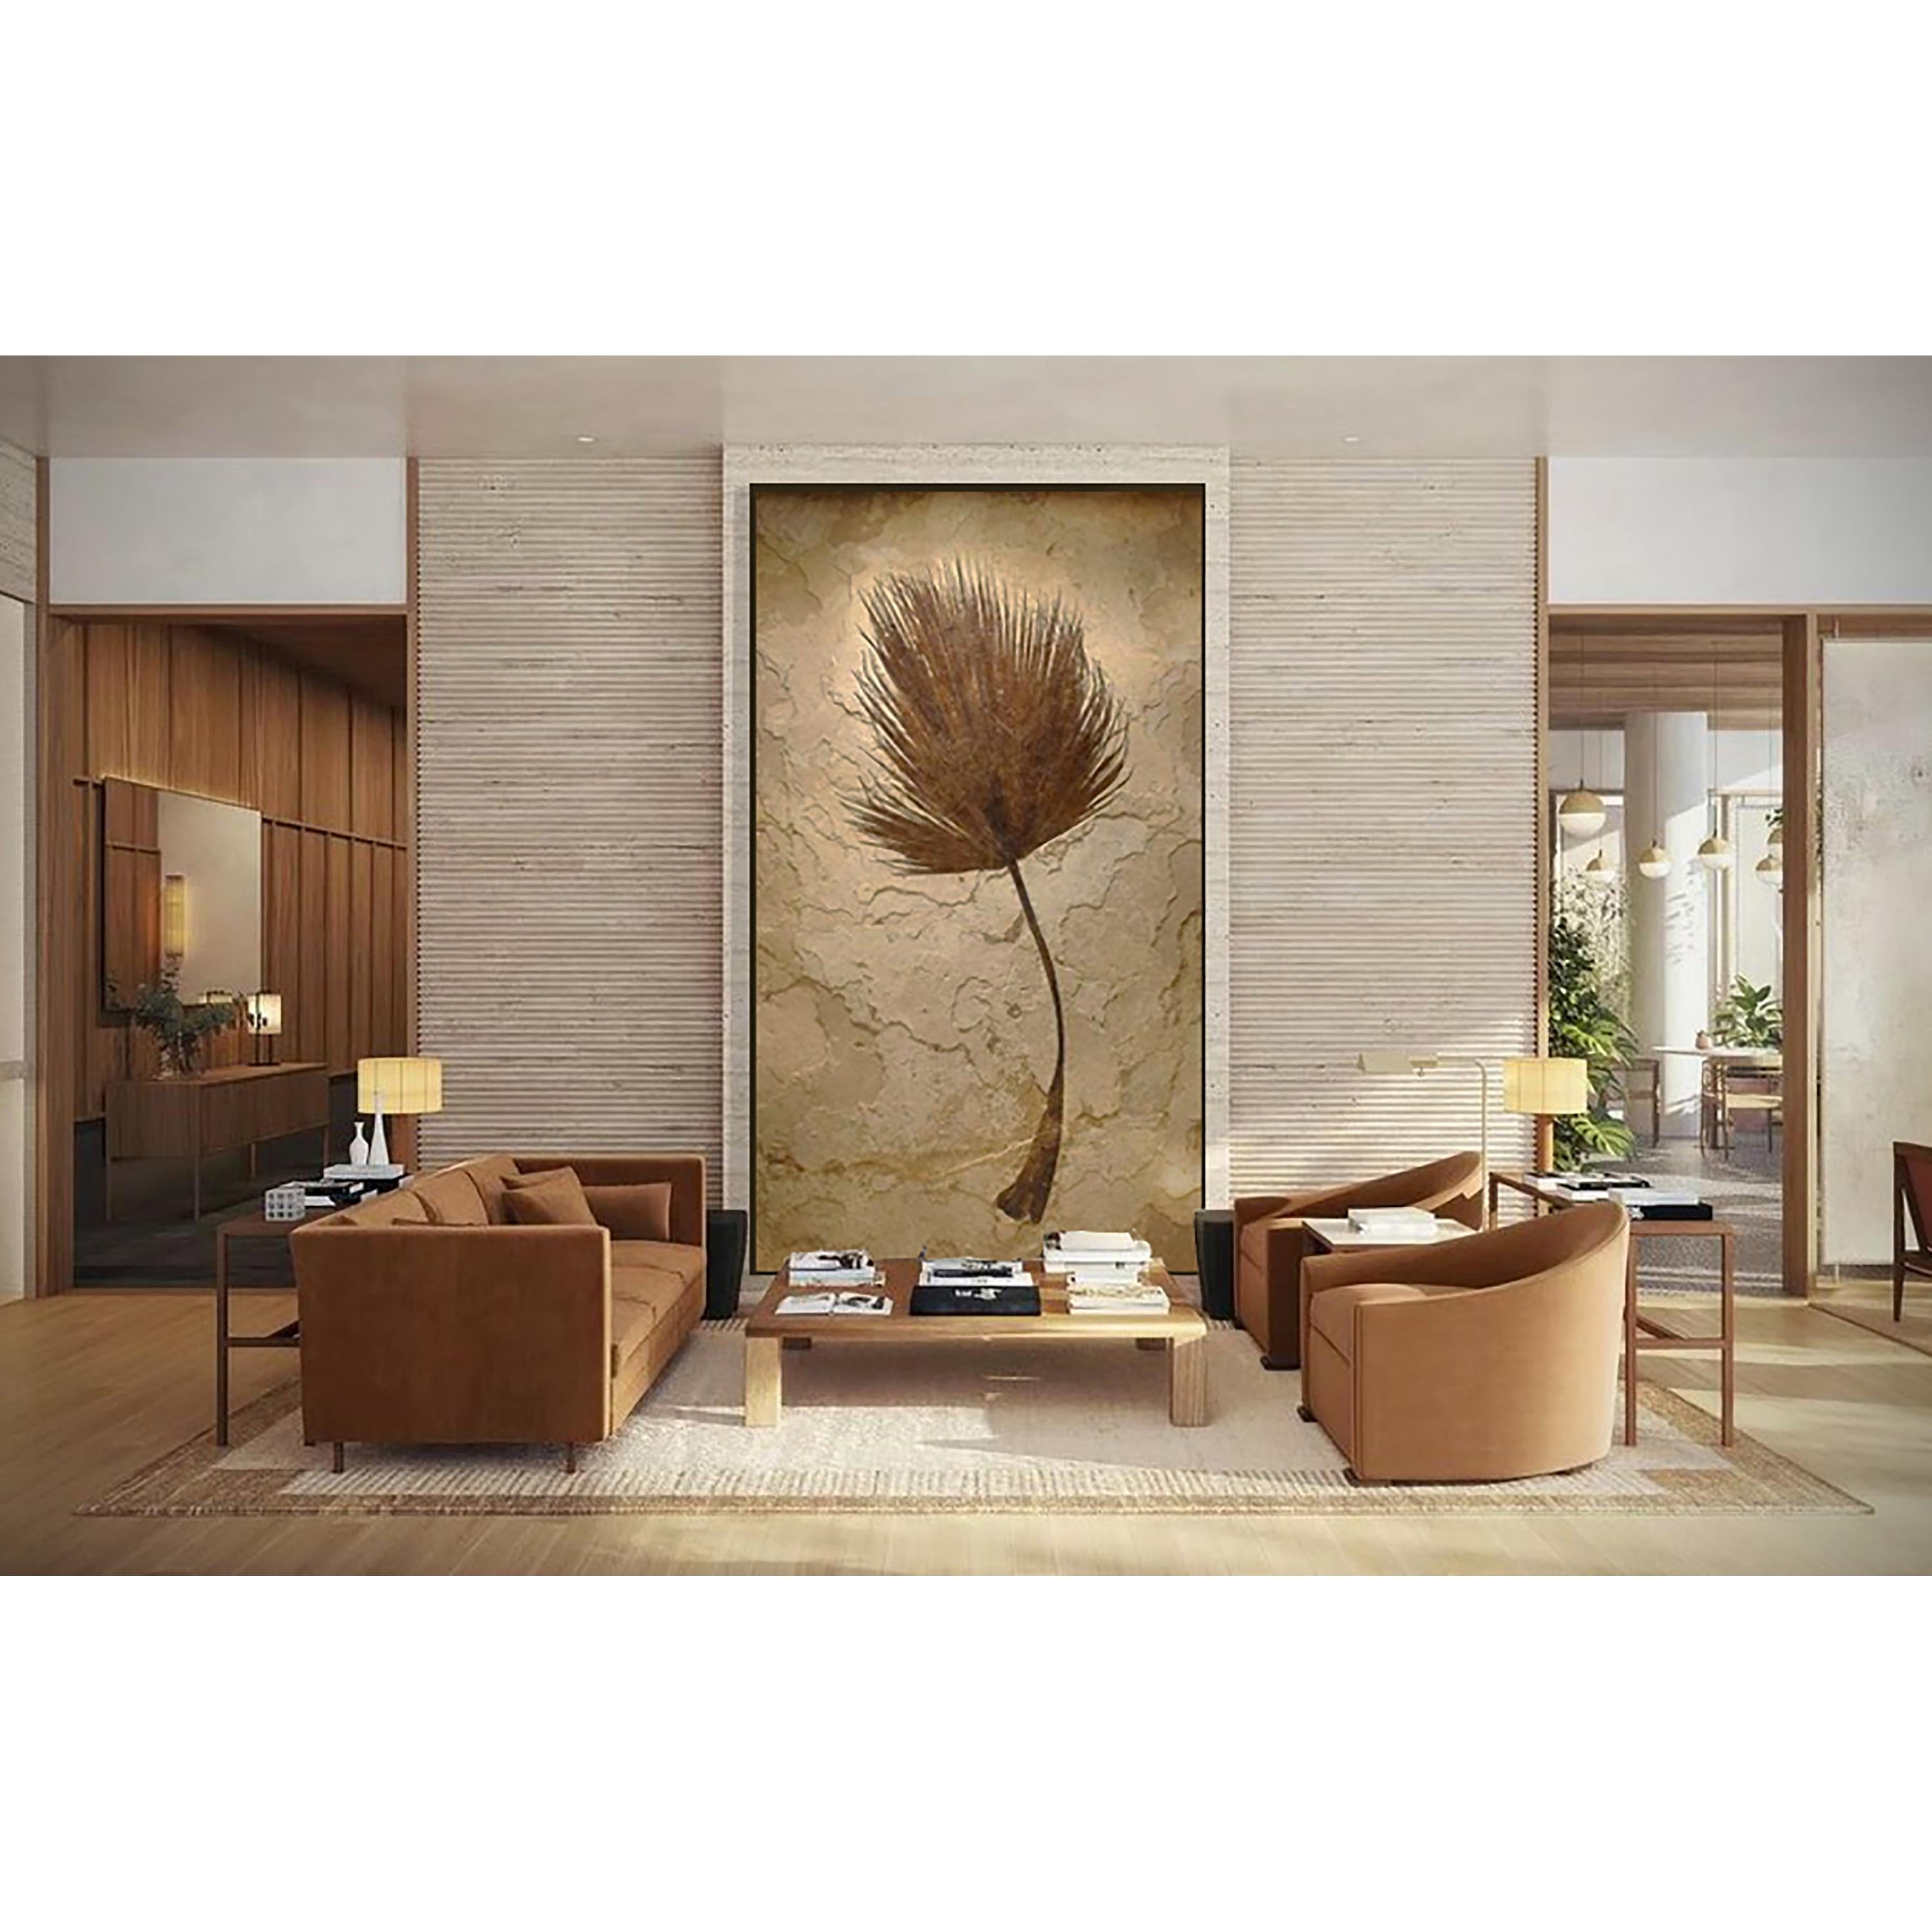 This mural features a impressively sized fossilized palm frond, an Eocene era fossil dating back about 50 million years. Plant life often produces some of the most aesthetic Green River Formation fossils we have prepared over the years; due to the